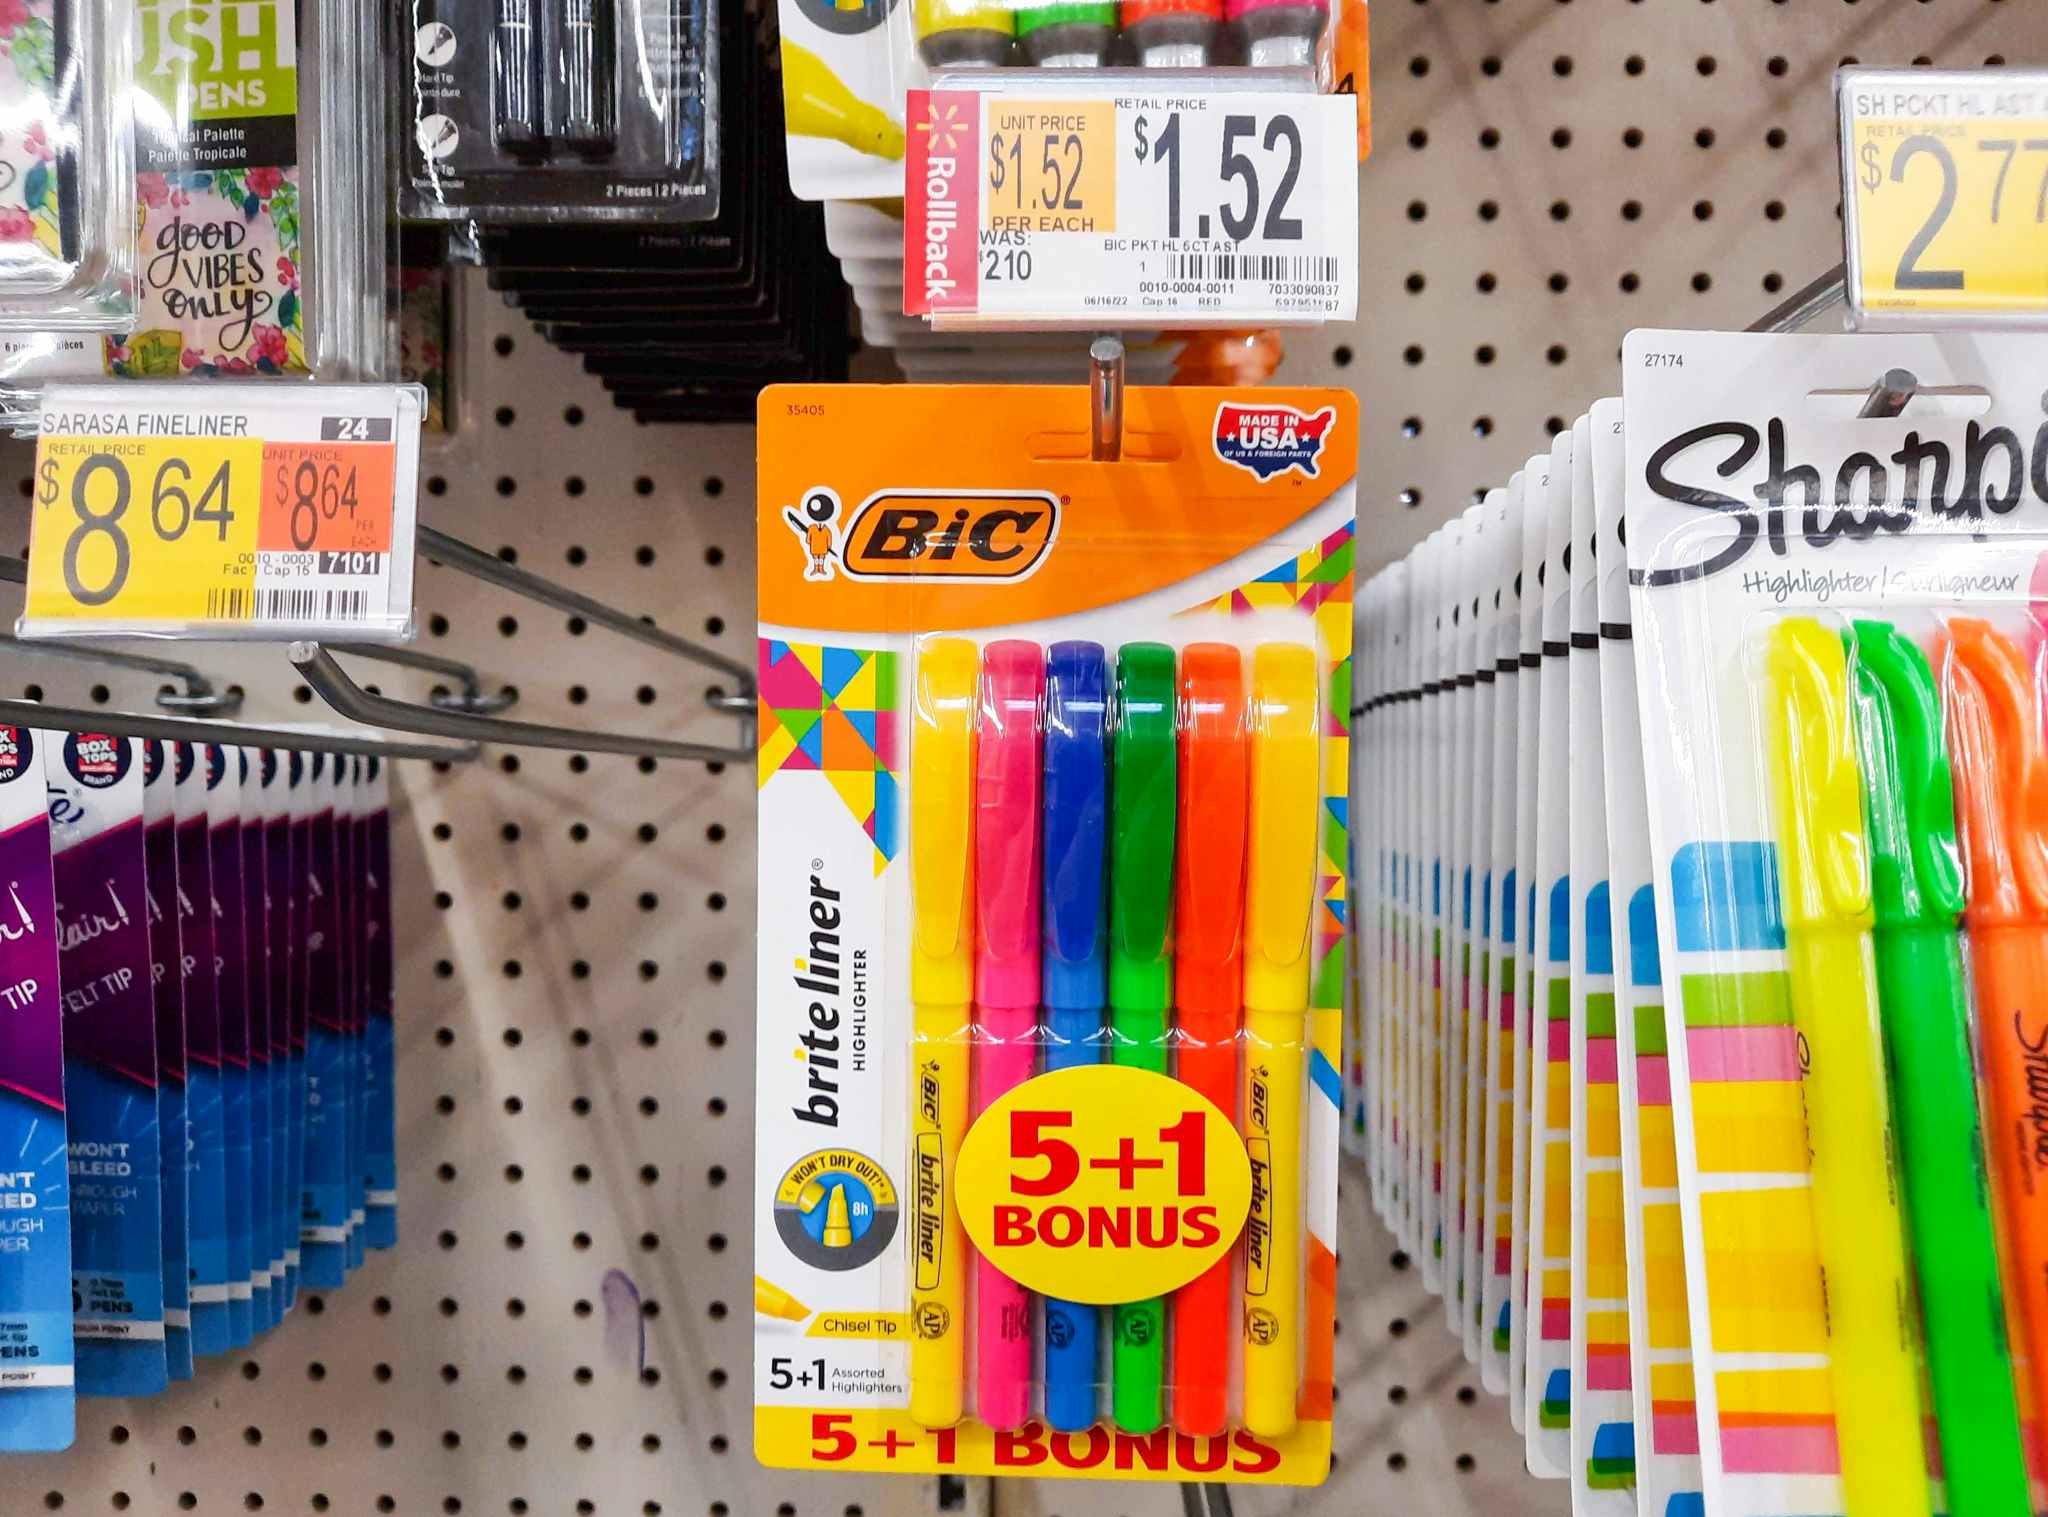 Bic Brite Liner Highlighters on display at Walmart. Rollback price tag shows that the price is $1.52, regularly $2.10.